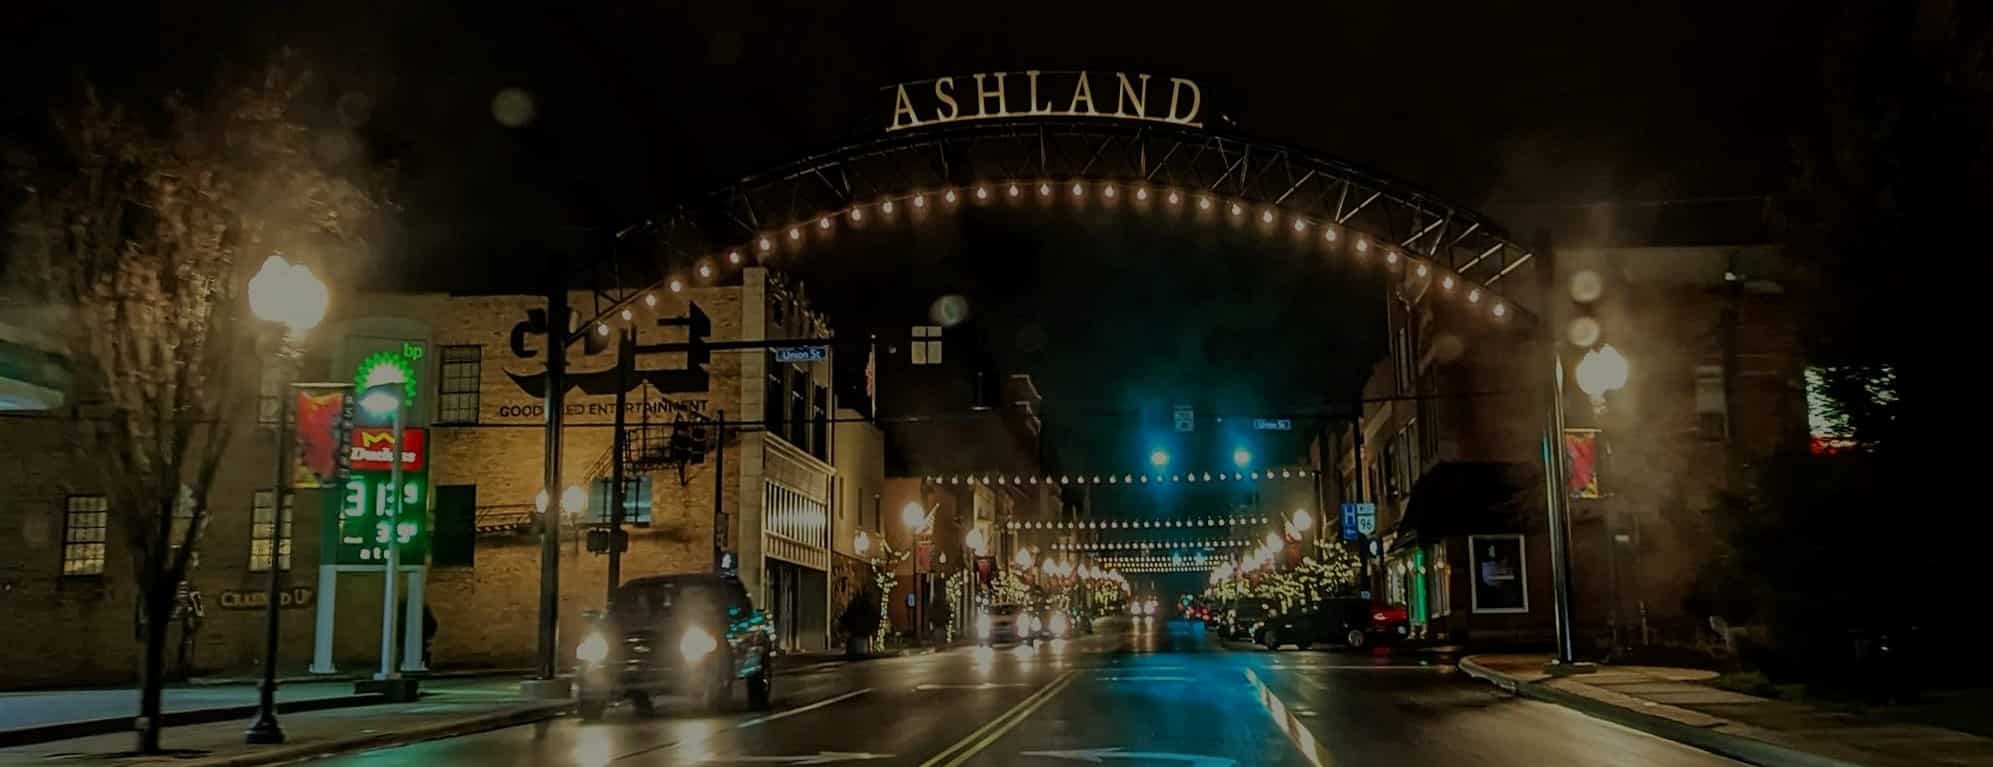 Best places to eat in Ashland Ohio - Ashland Real Estate Auctions